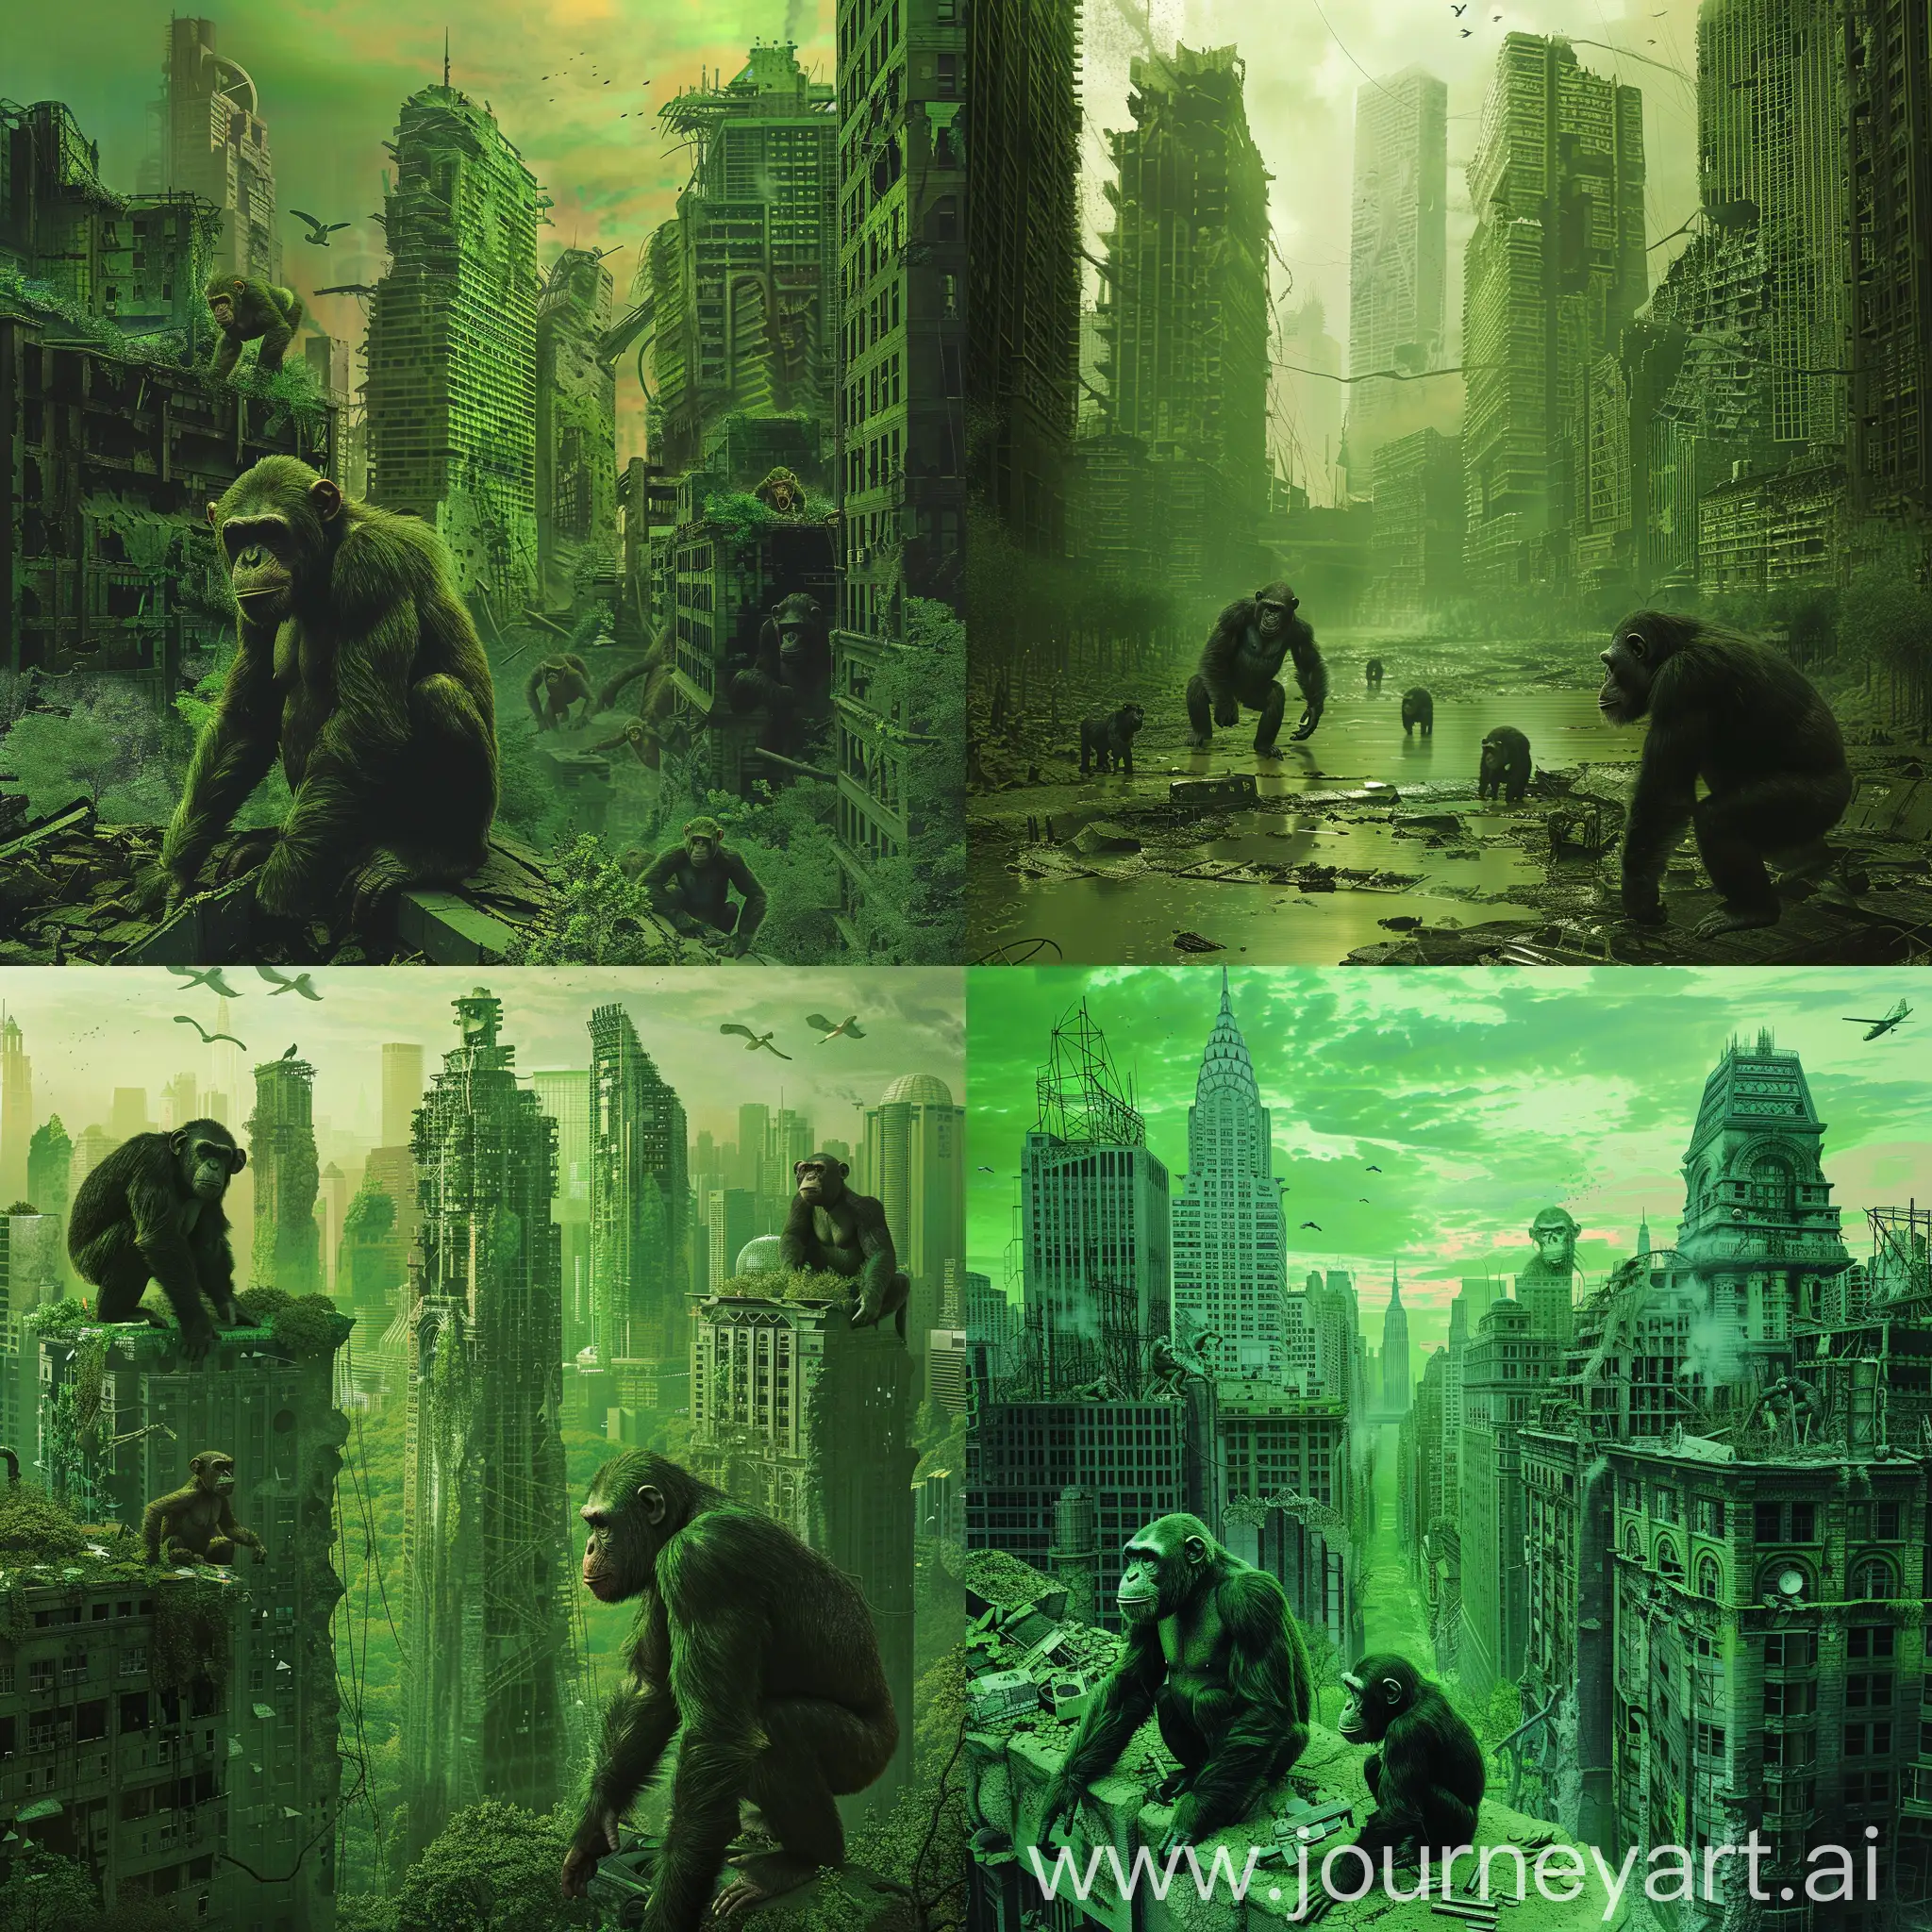 PostApocalyptic-Green-Cityscape-with-Apes